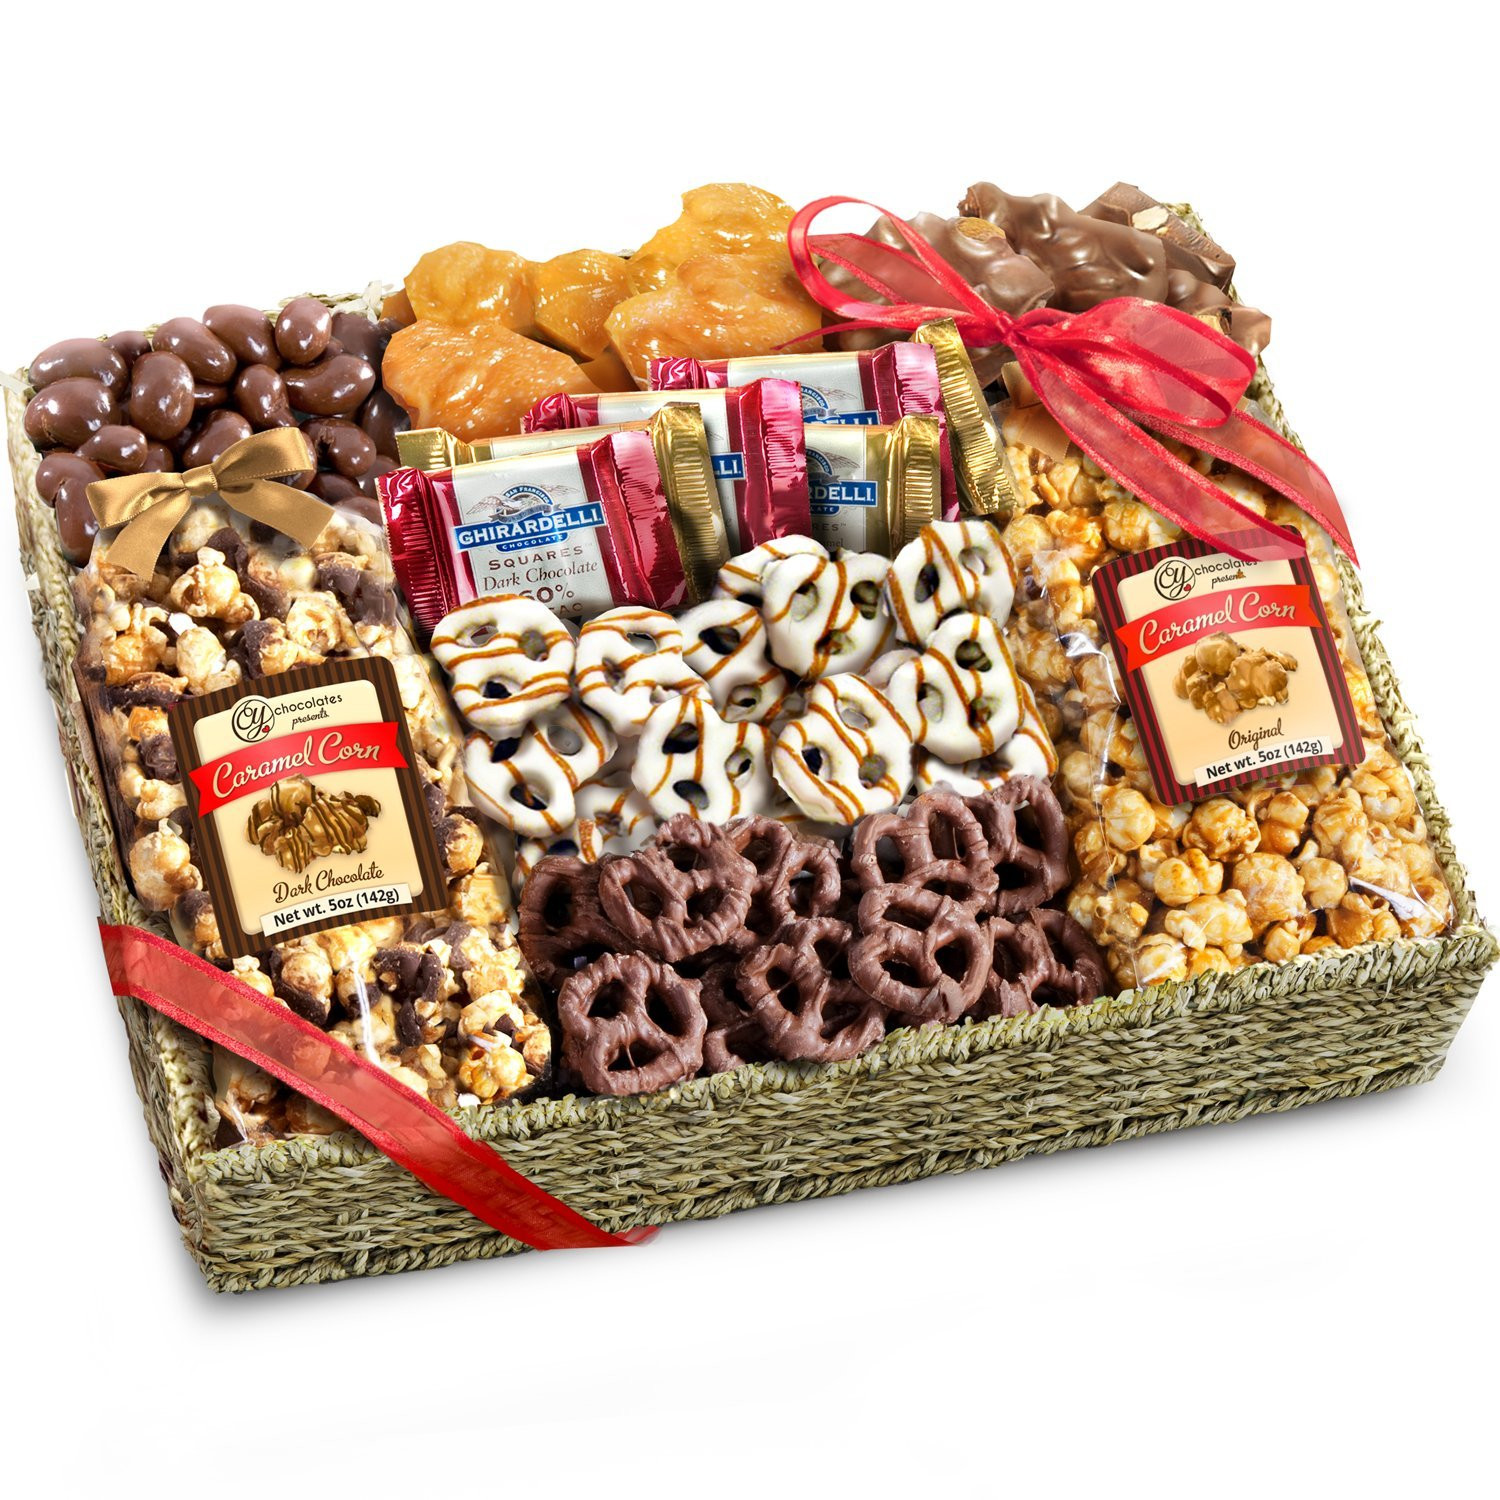 Best Gift Basket Ideas
 Cookie Gift Boxes & Baskets Best Holiday Treats Snacks